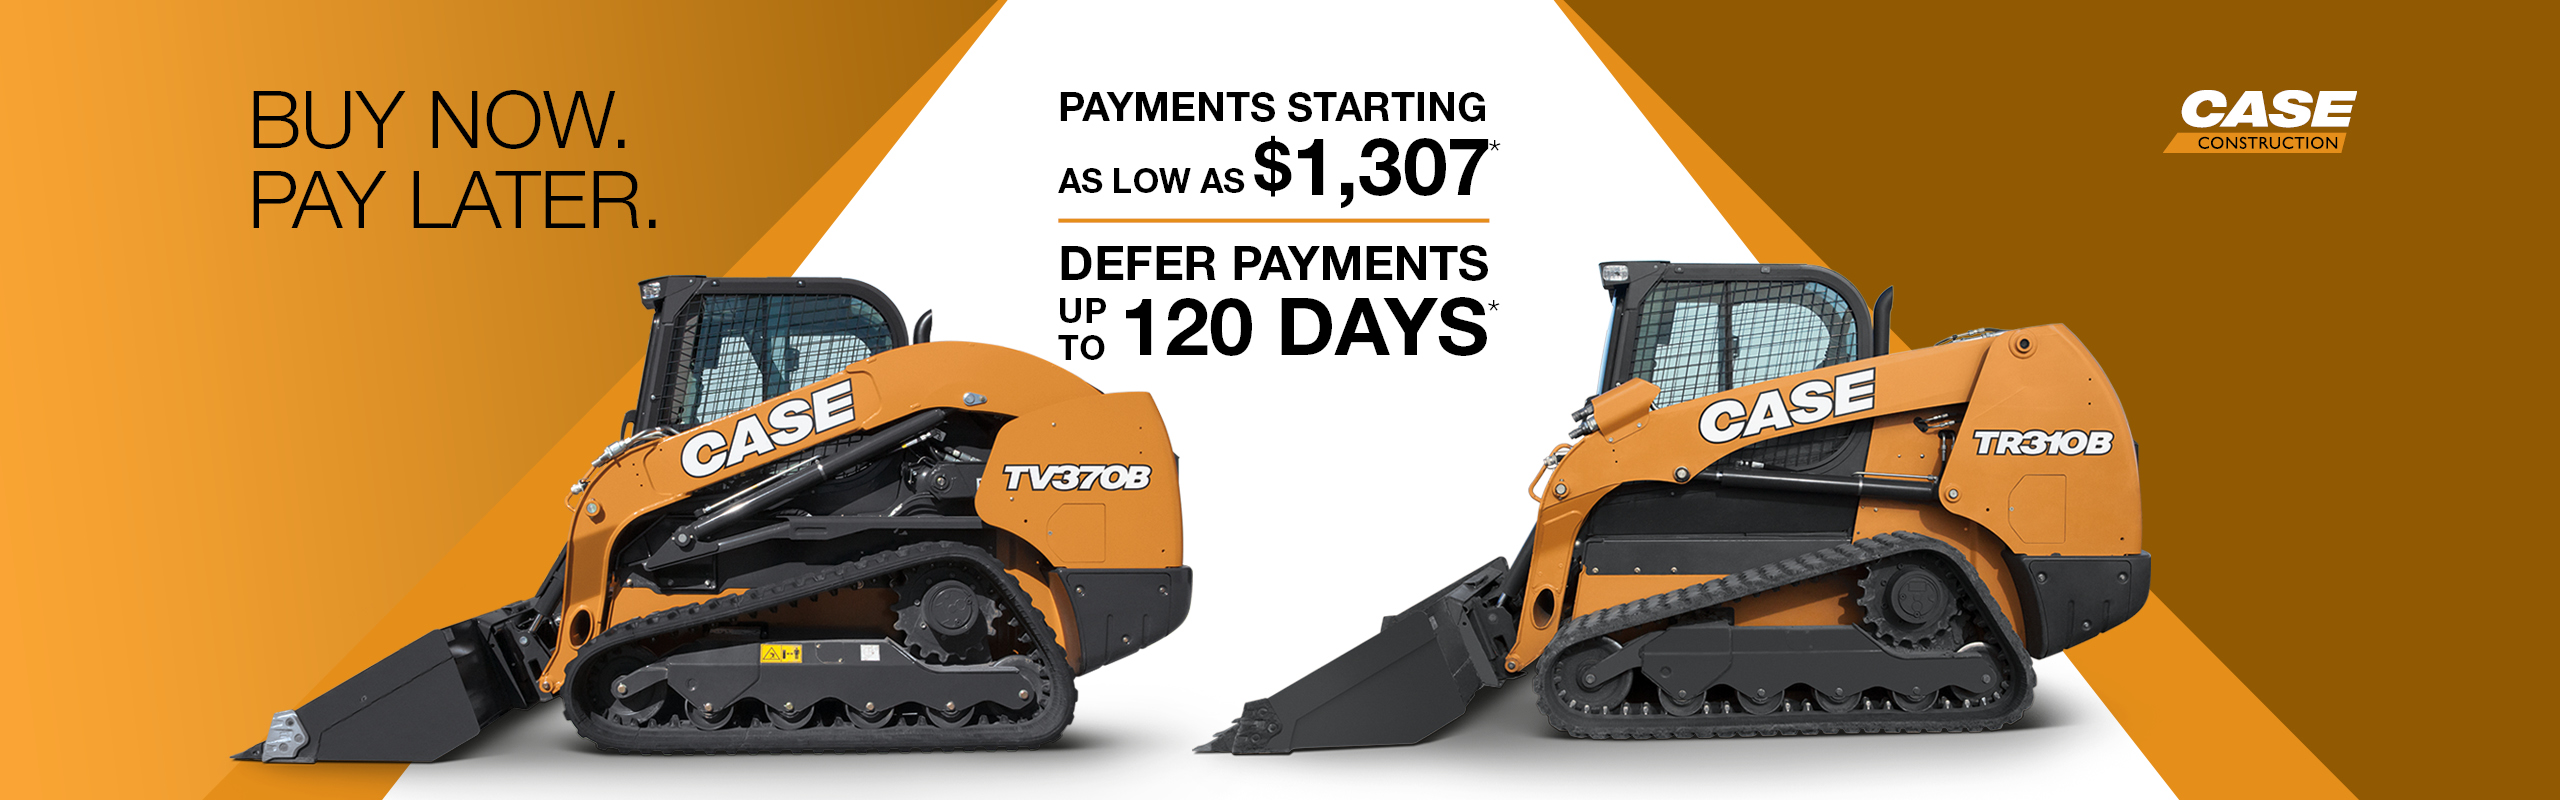 120 days’ deferred payment on in-stock compact track loaders, with payments starting as low as $1307